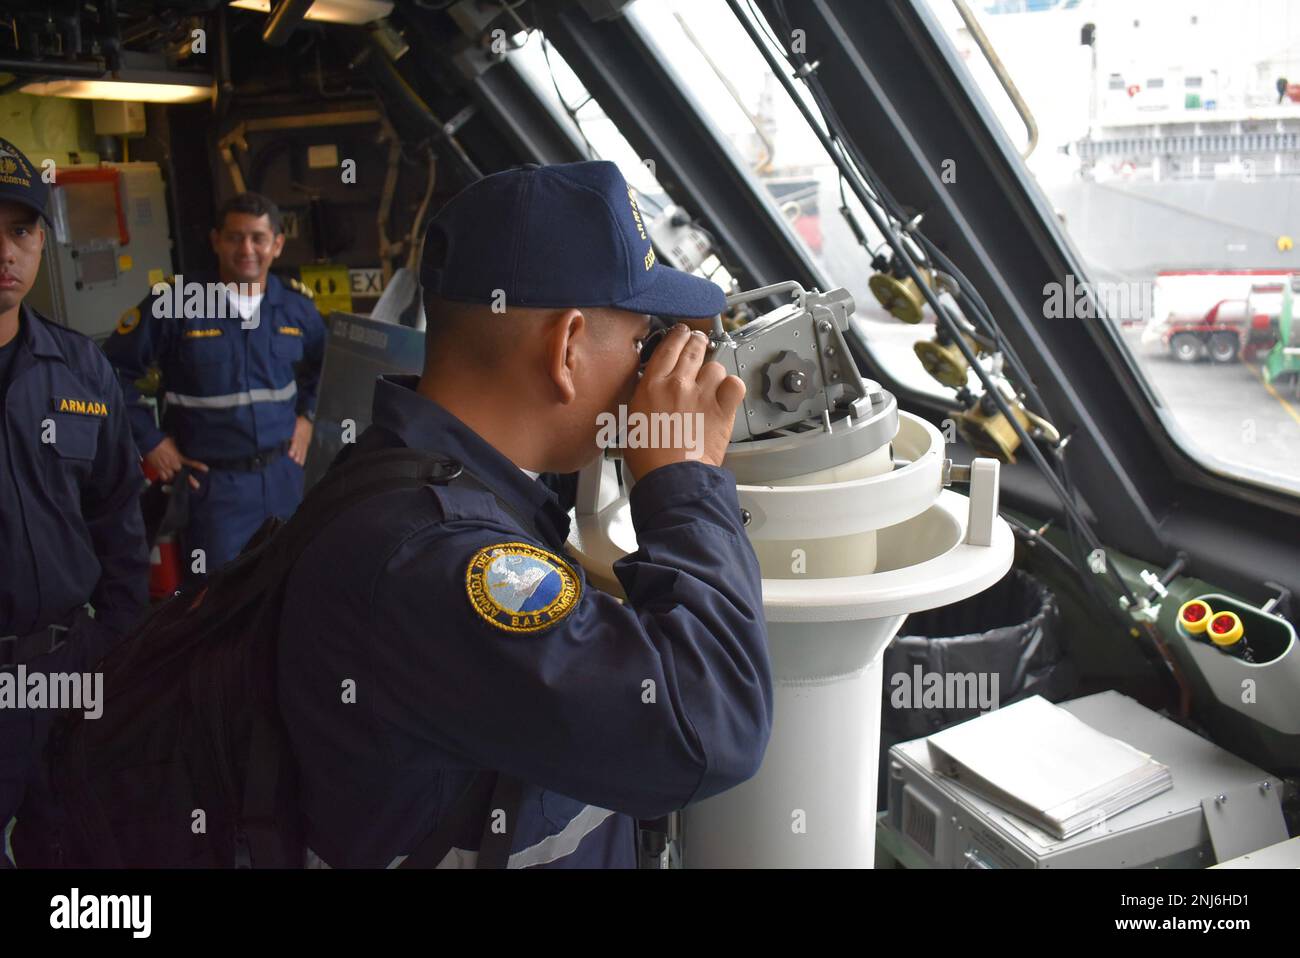 220805-N-N3764-1007  MANTA, Ecuador - (Aug. 5, 2022) -- An Ecuadorian navy sailor looks through a telescopic alidade while taking a tour aboard the Freedom-variant littoral combat ship USS Billings (LCS 15) in Manta, Ecuador, Aug. 5, 2022. Billings is deployed to the U.S. 4th Fleet area of operations to support Joint Interagency Task Force South’s mission, which includes counter-illicit drug trafficking missions in the Caribbean and Eastern Pacific. Stock Photo